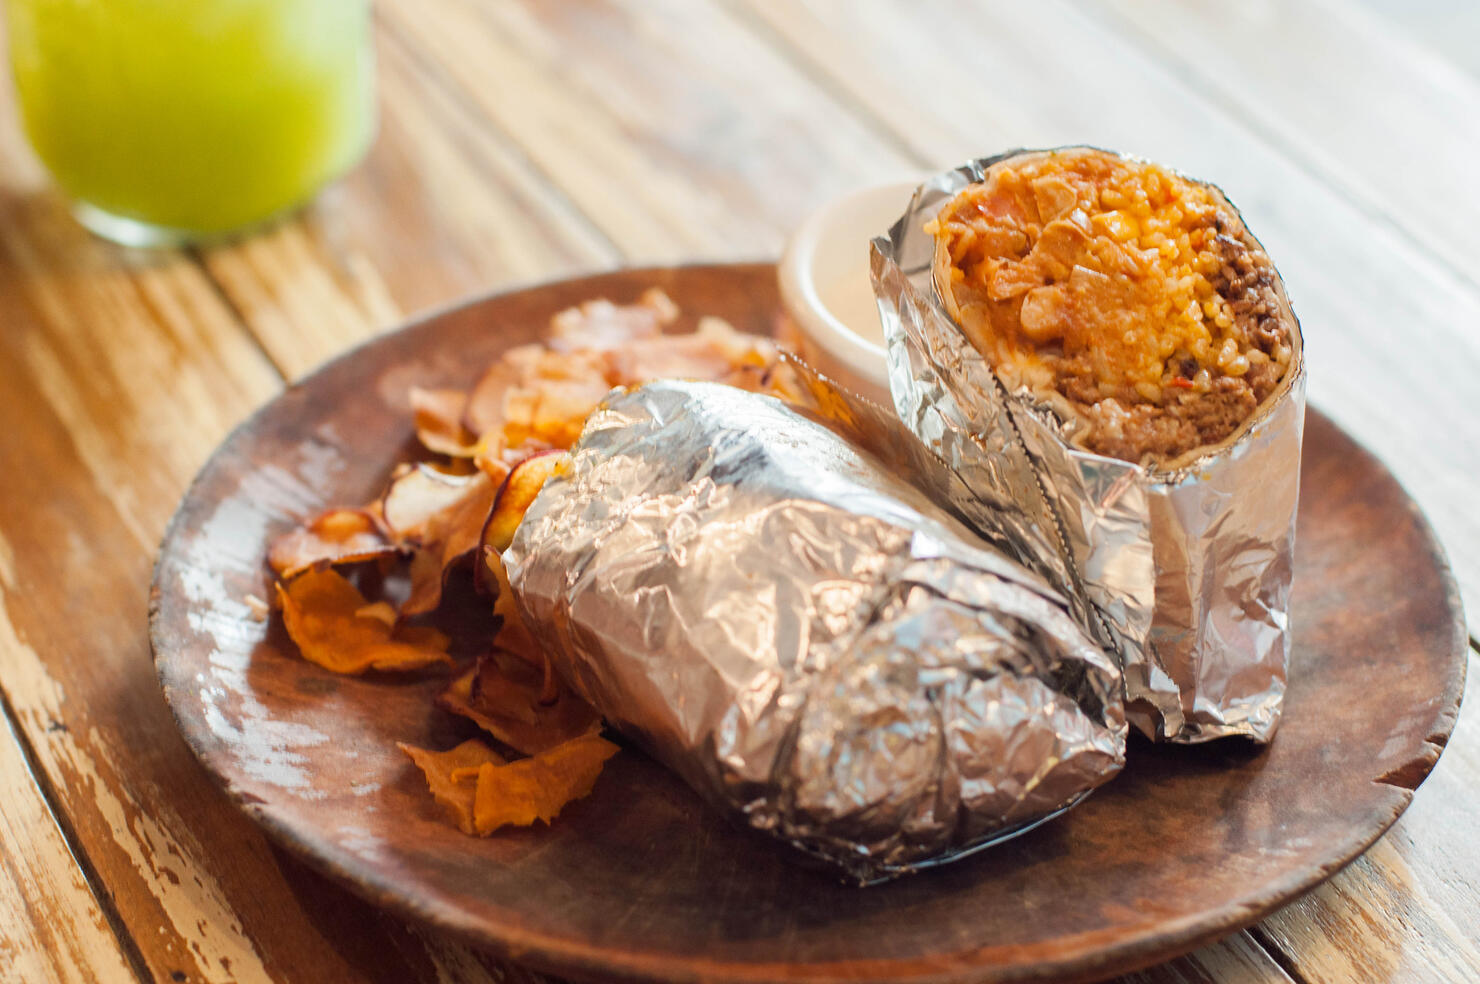 A close-up view of Mexican Burrito with sweet potato chips on a wooden table